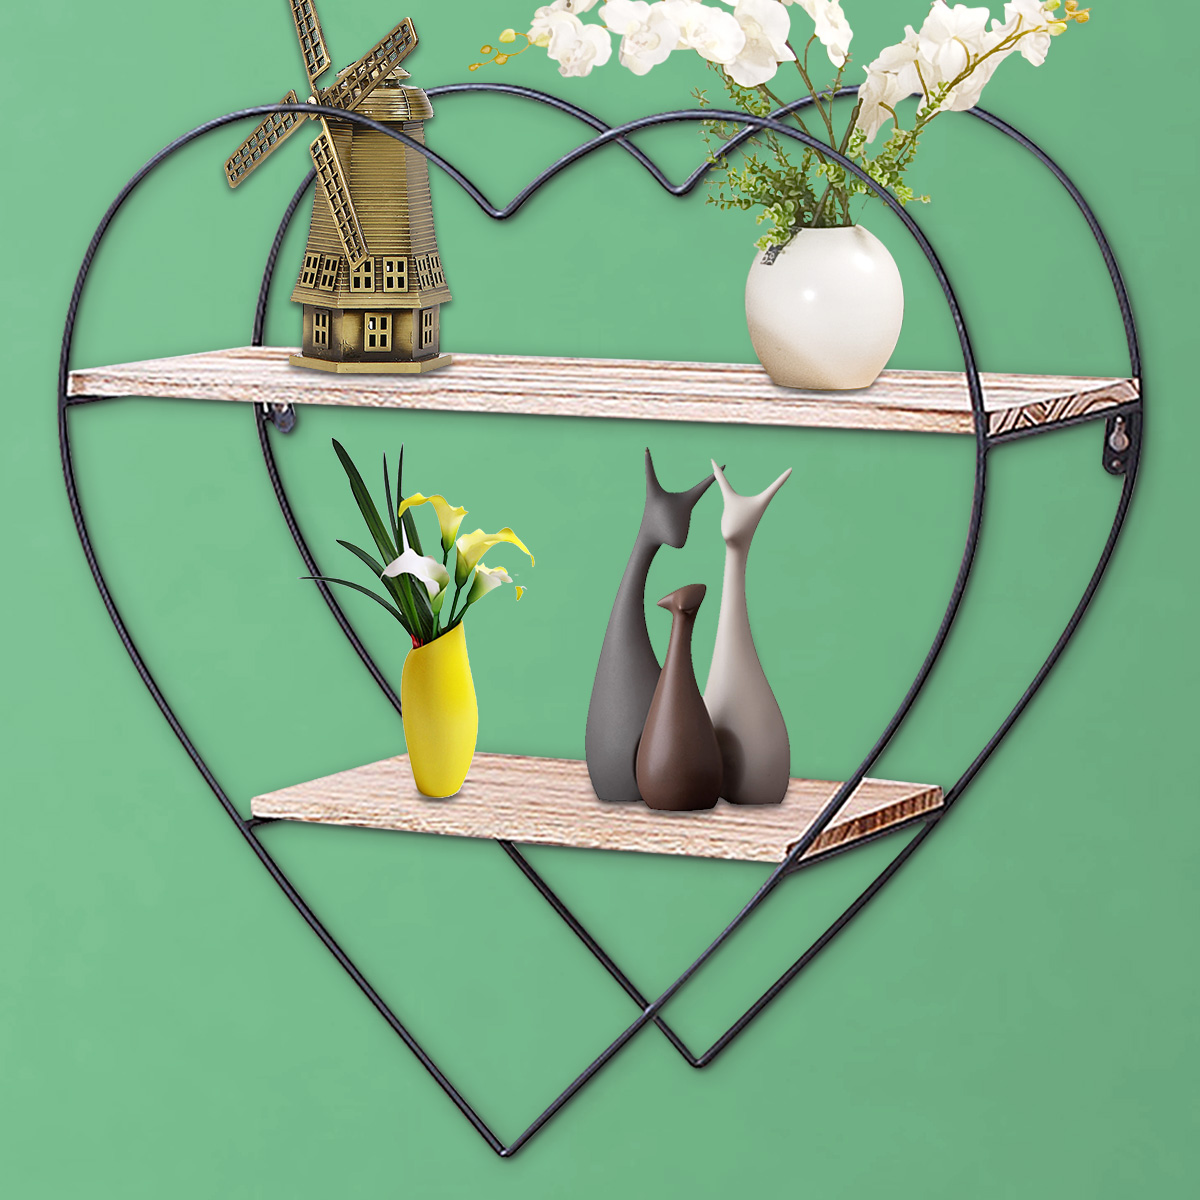 Heart-shaped-Wooden-Wall-Shelf-2-Layers-Vintage-Storage-Wall-Mounted-Display-Floating-Rack-for-Kitch-1785937-6